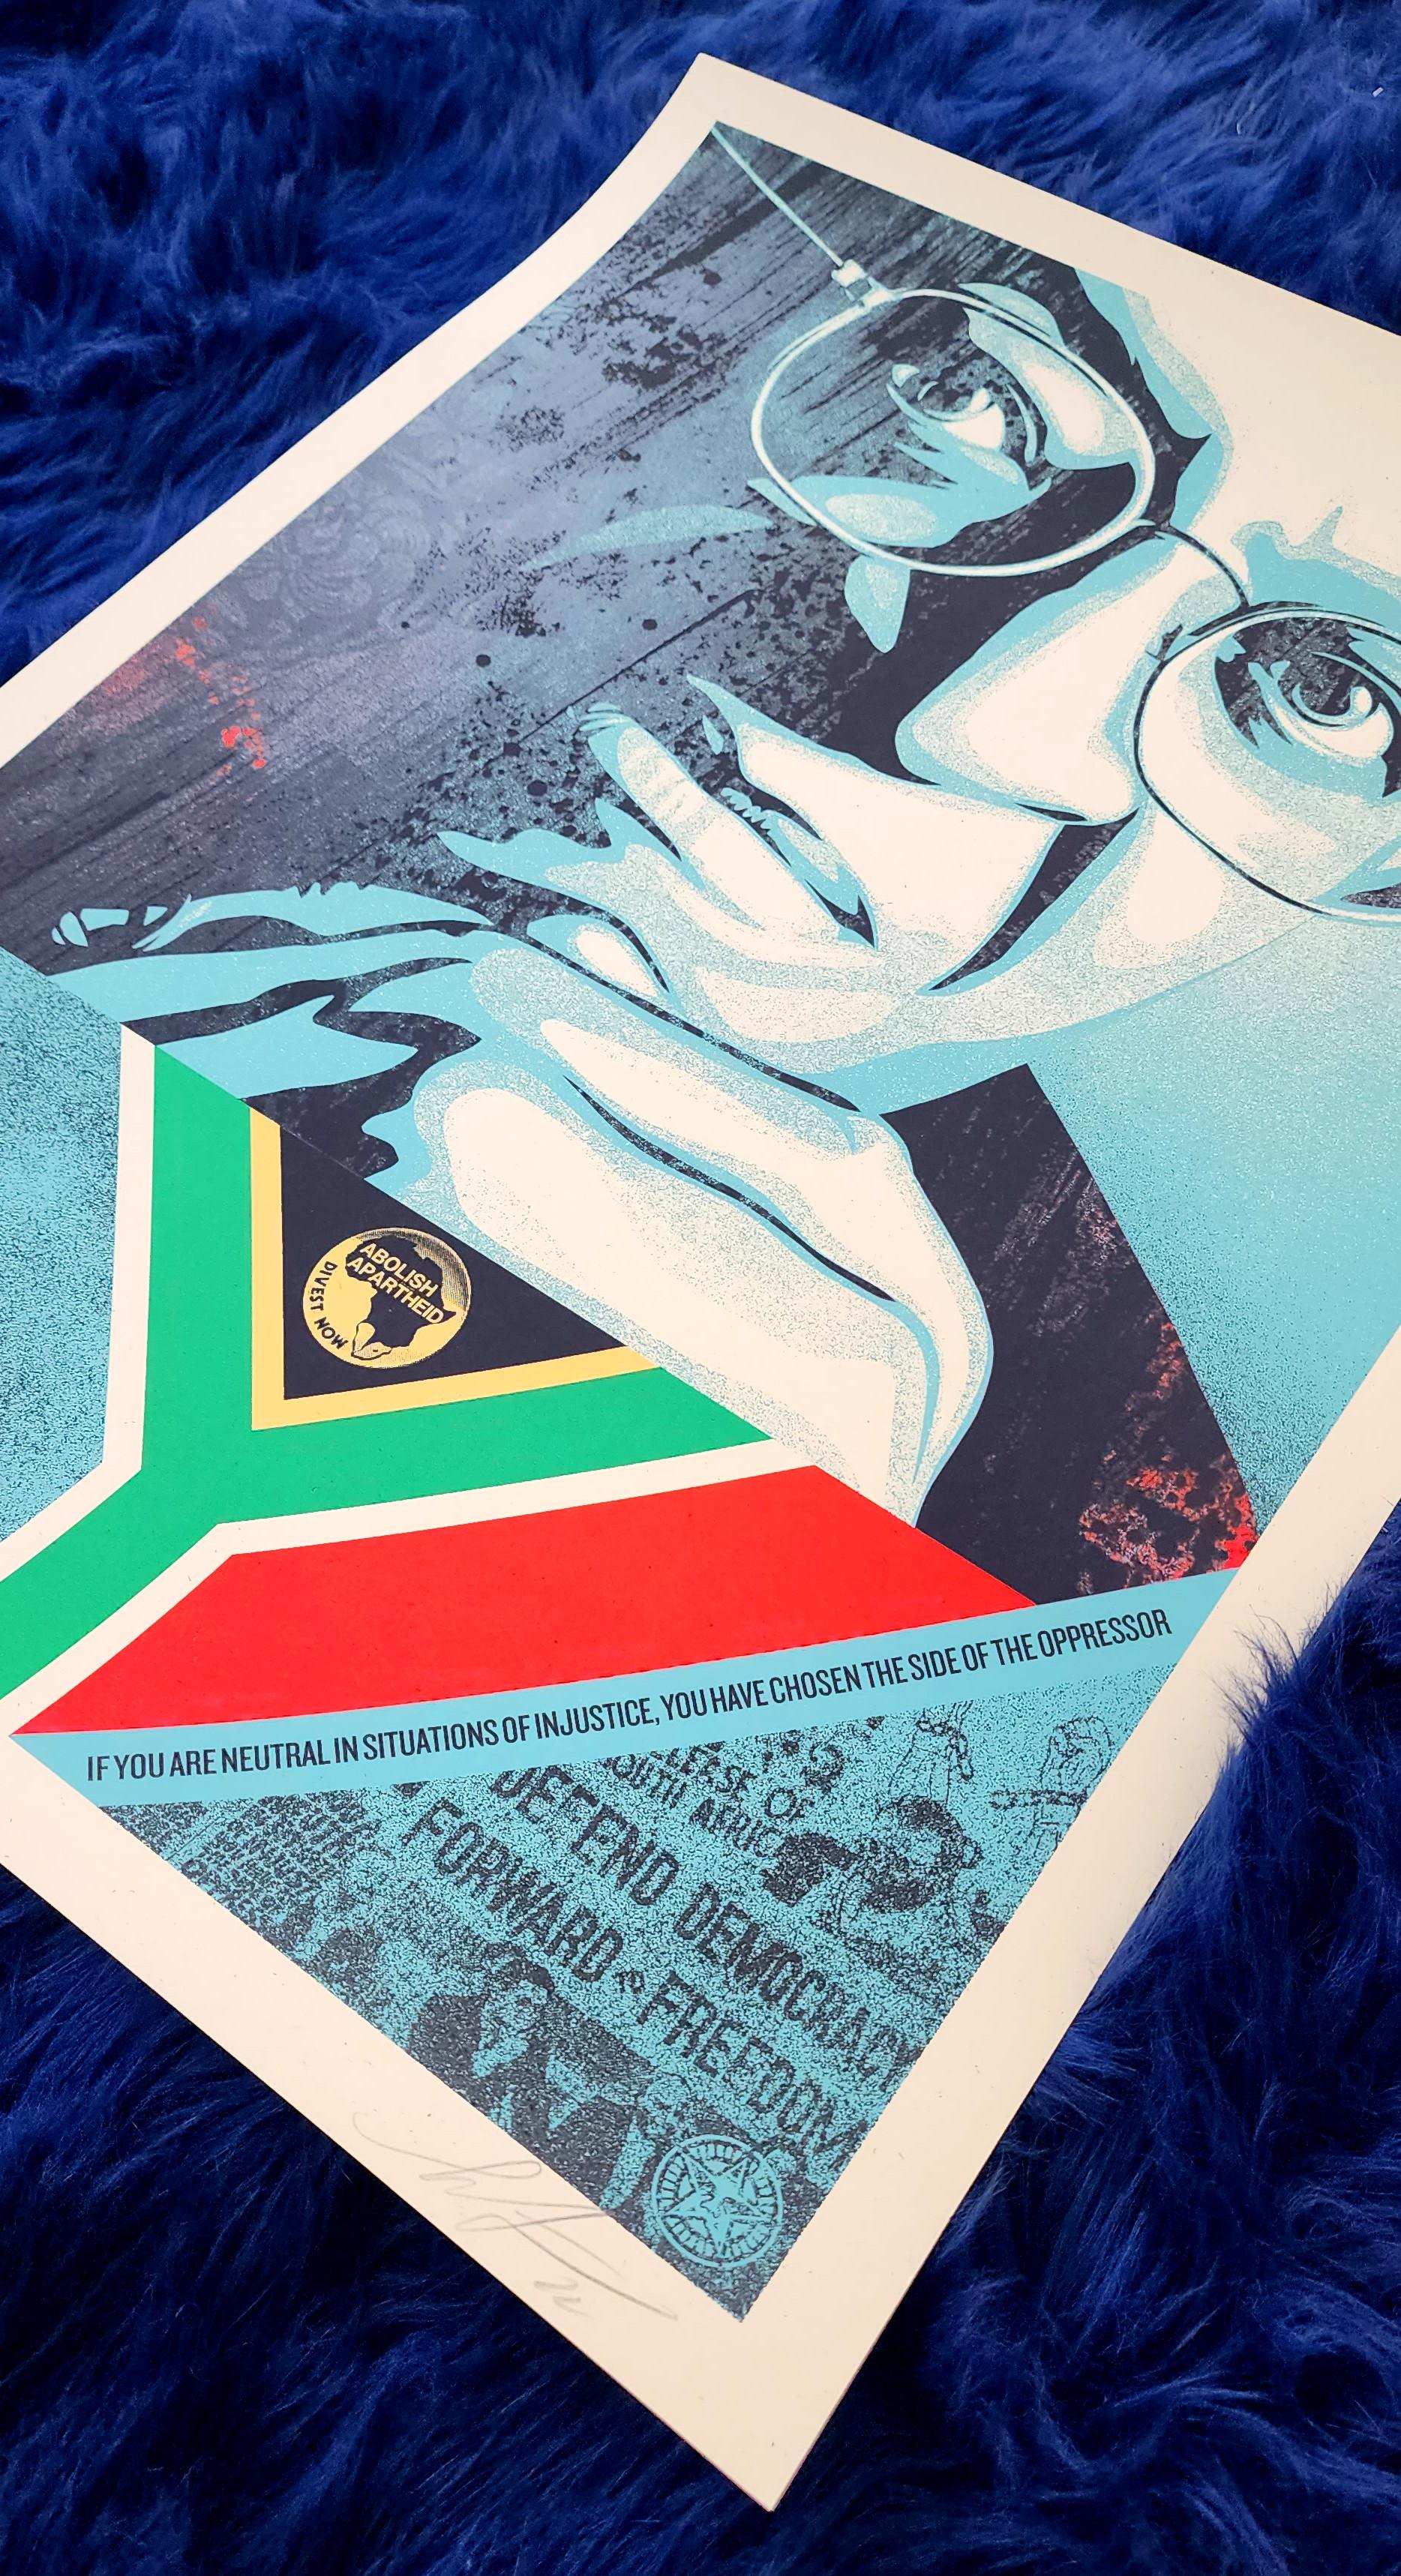 Desmond Tutu (Iconic, South Africa, Nobel Price) - Contemporary Print by Shepard Fairey